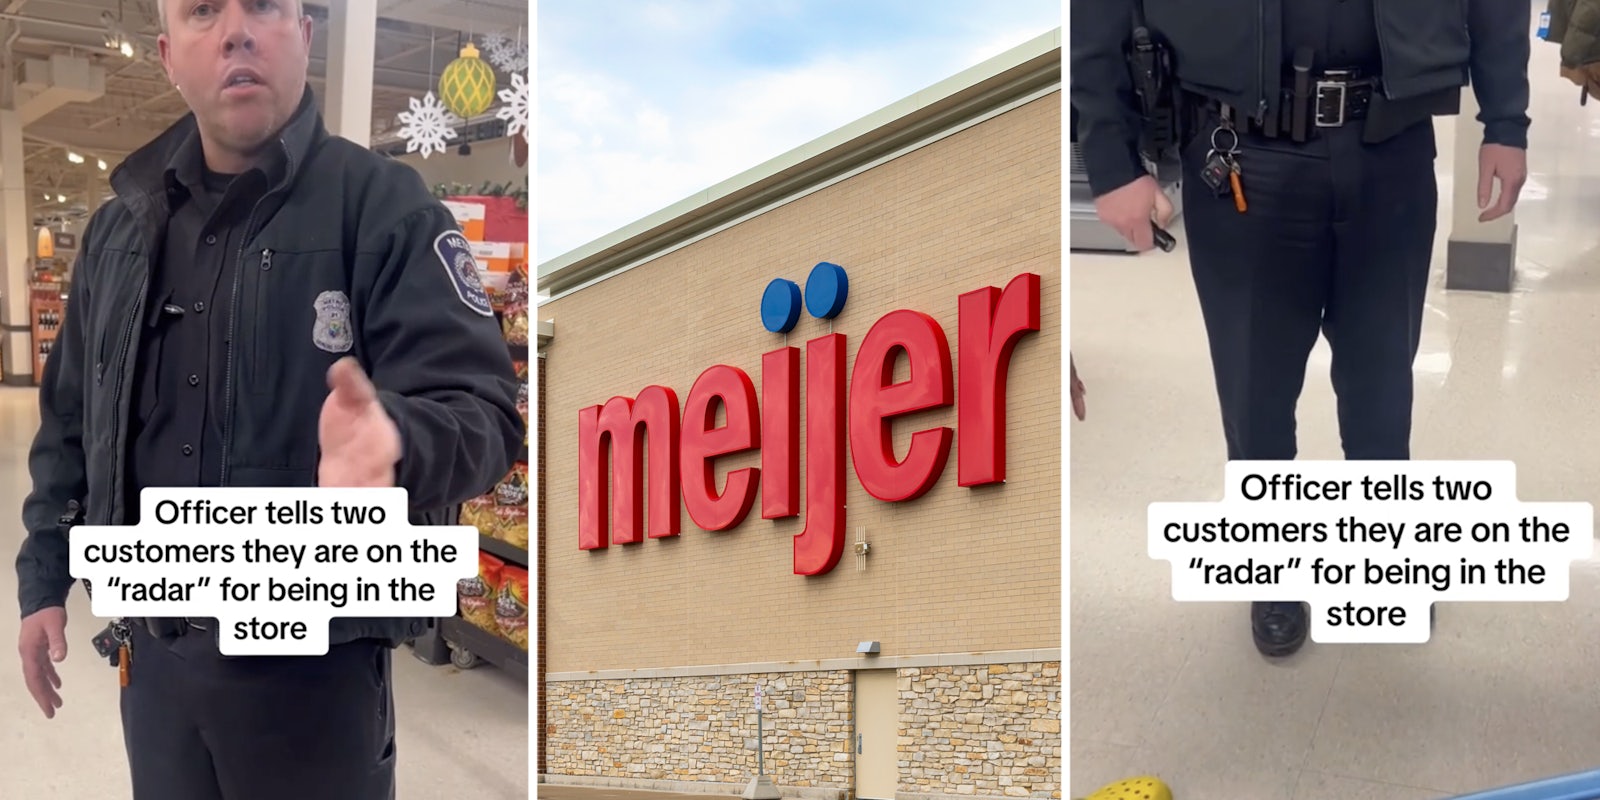 Police officer being racist(l+r), Meijer storefront(c)